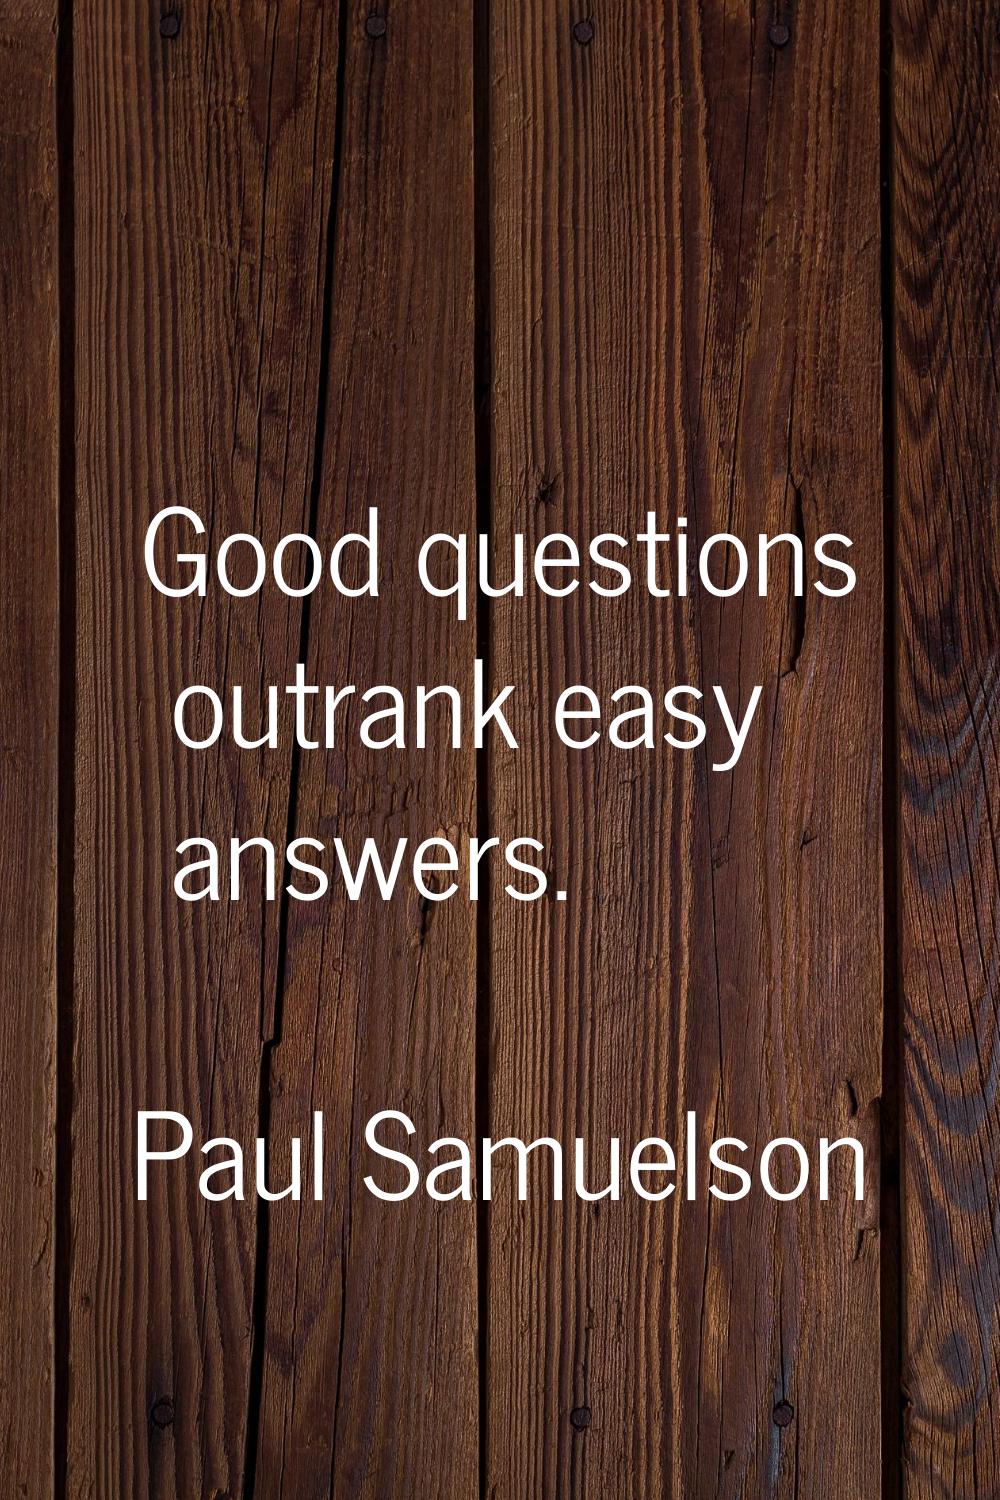 Good questions outrank easy answers.